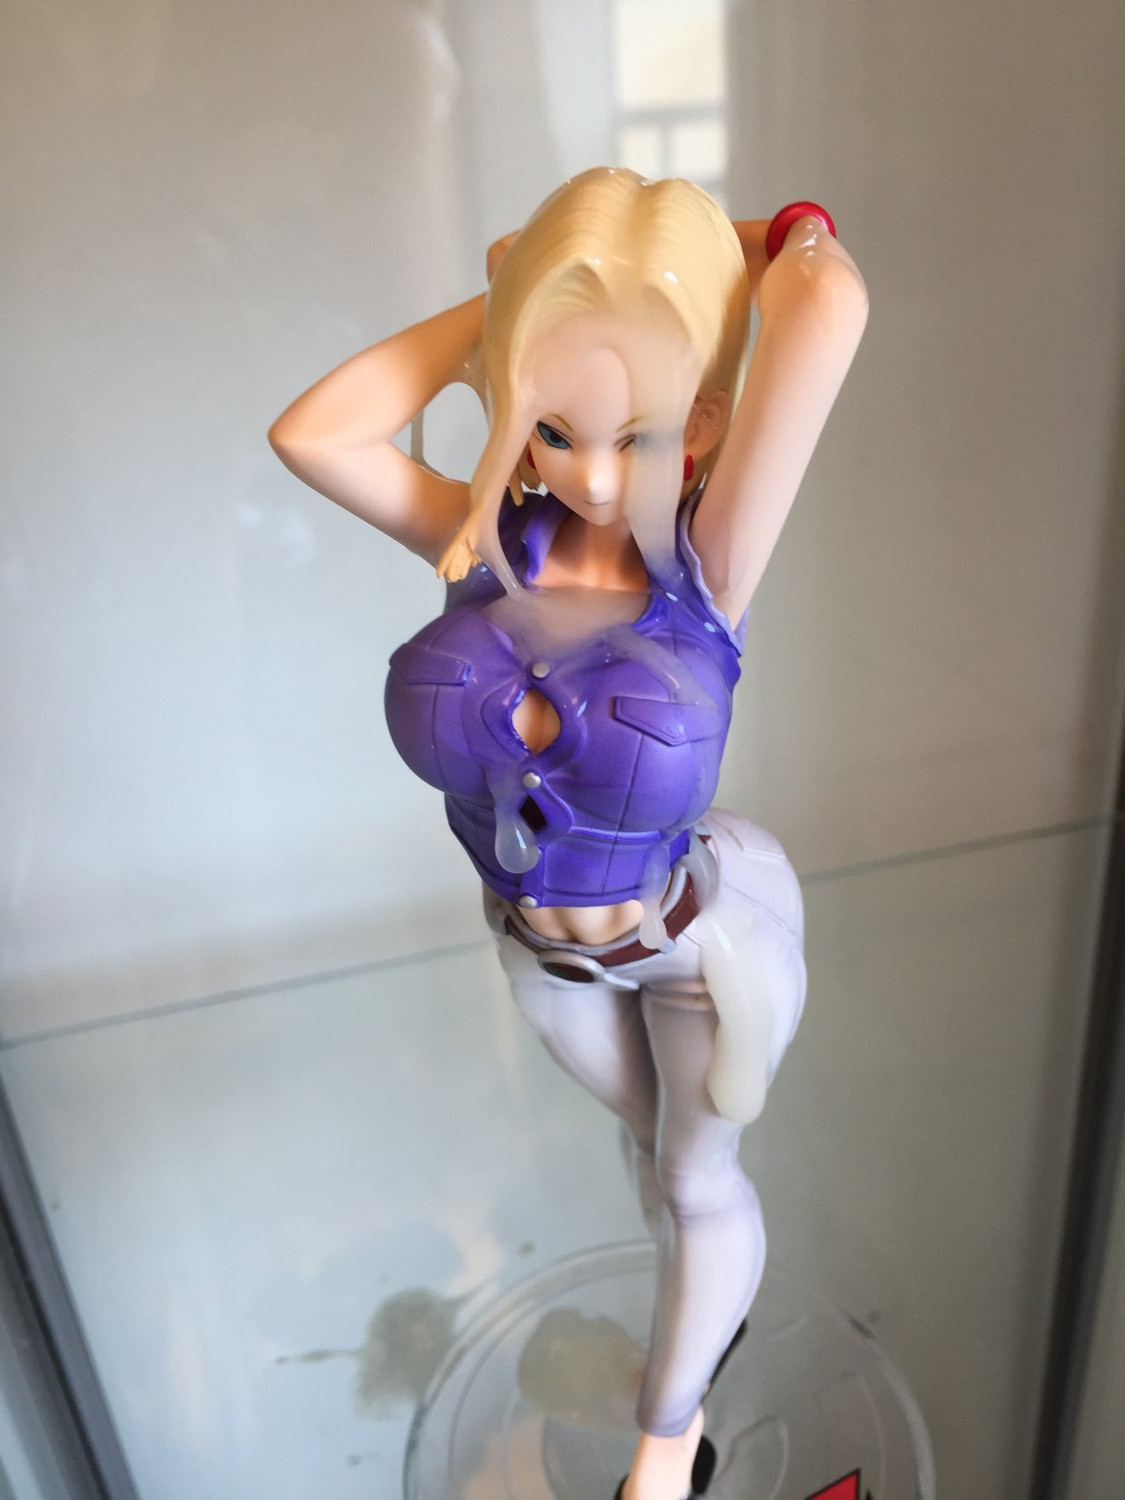 Android 18 Porn Girl - Android 18 figure bukkake (SOF) - Porn - EroMe